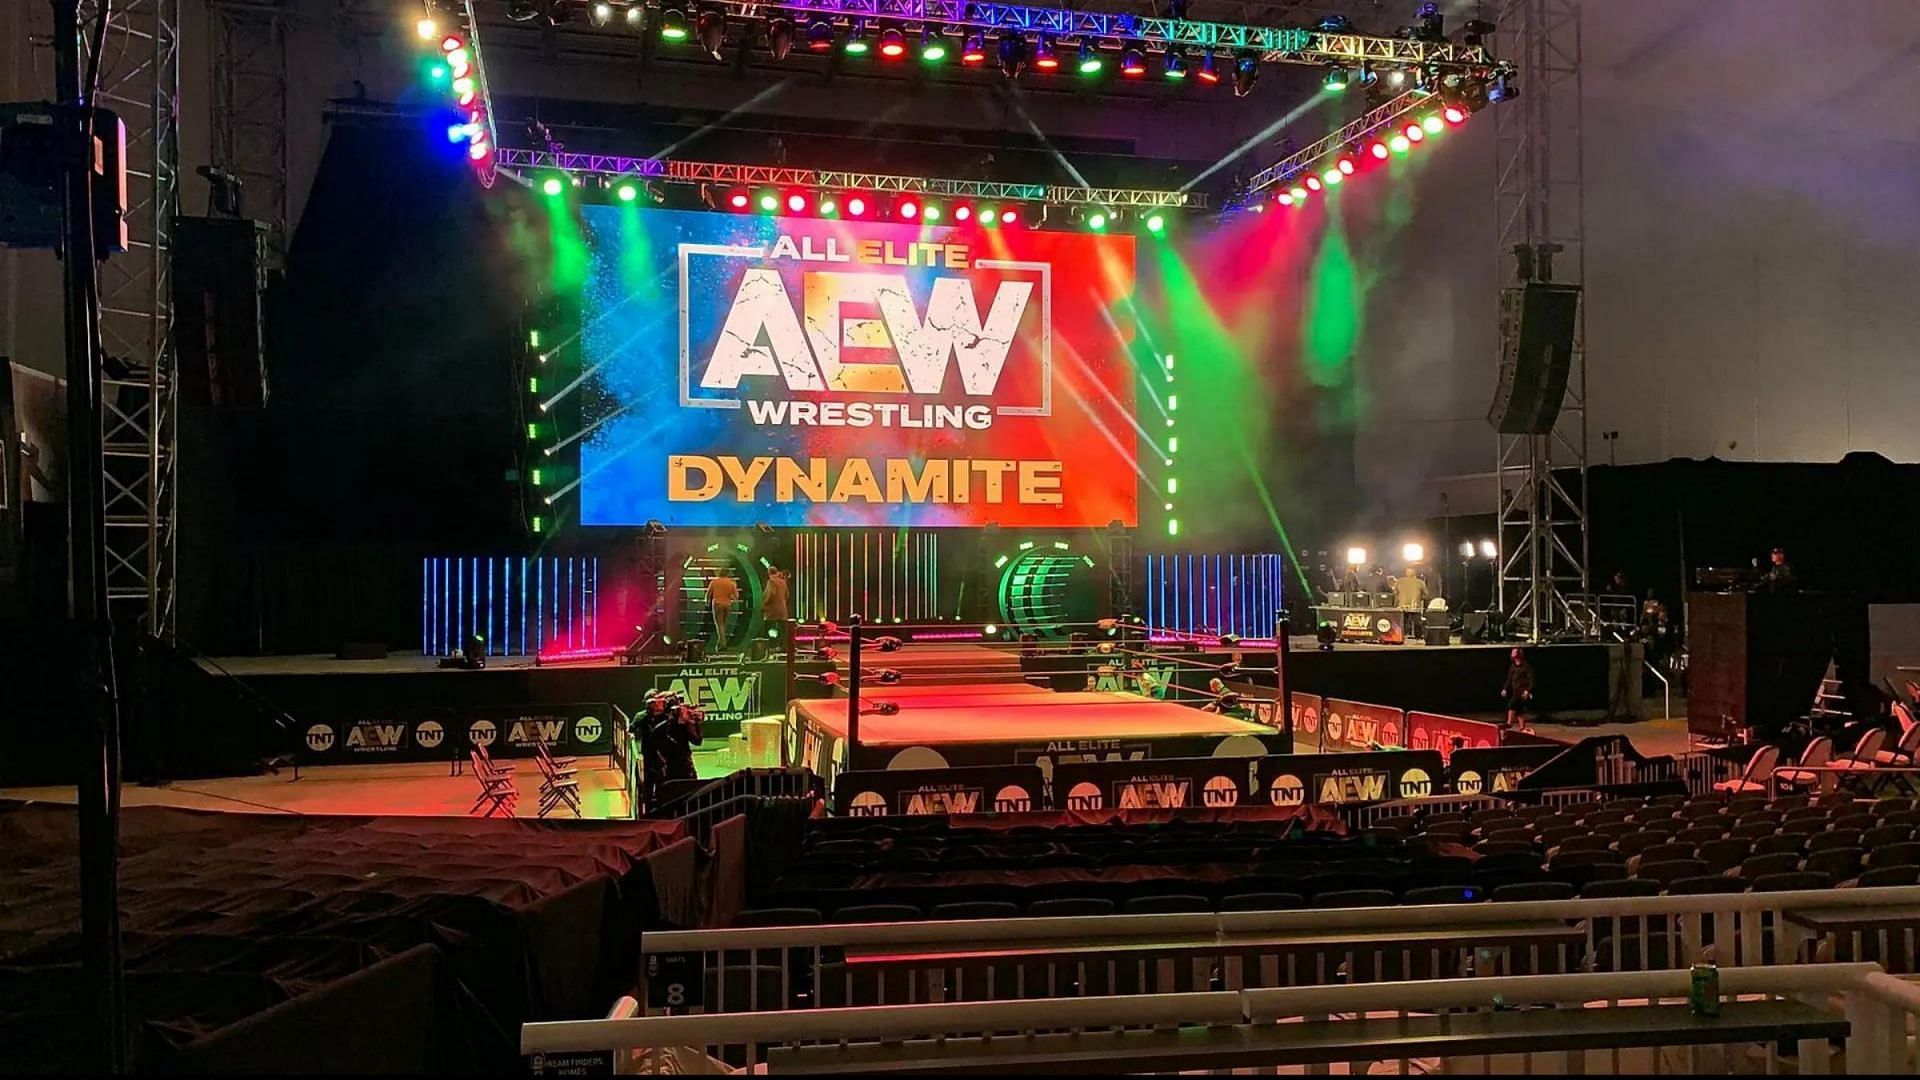 After 357 days, the AEW wrestler who had been out of action for a long time was finally spotted backstage.